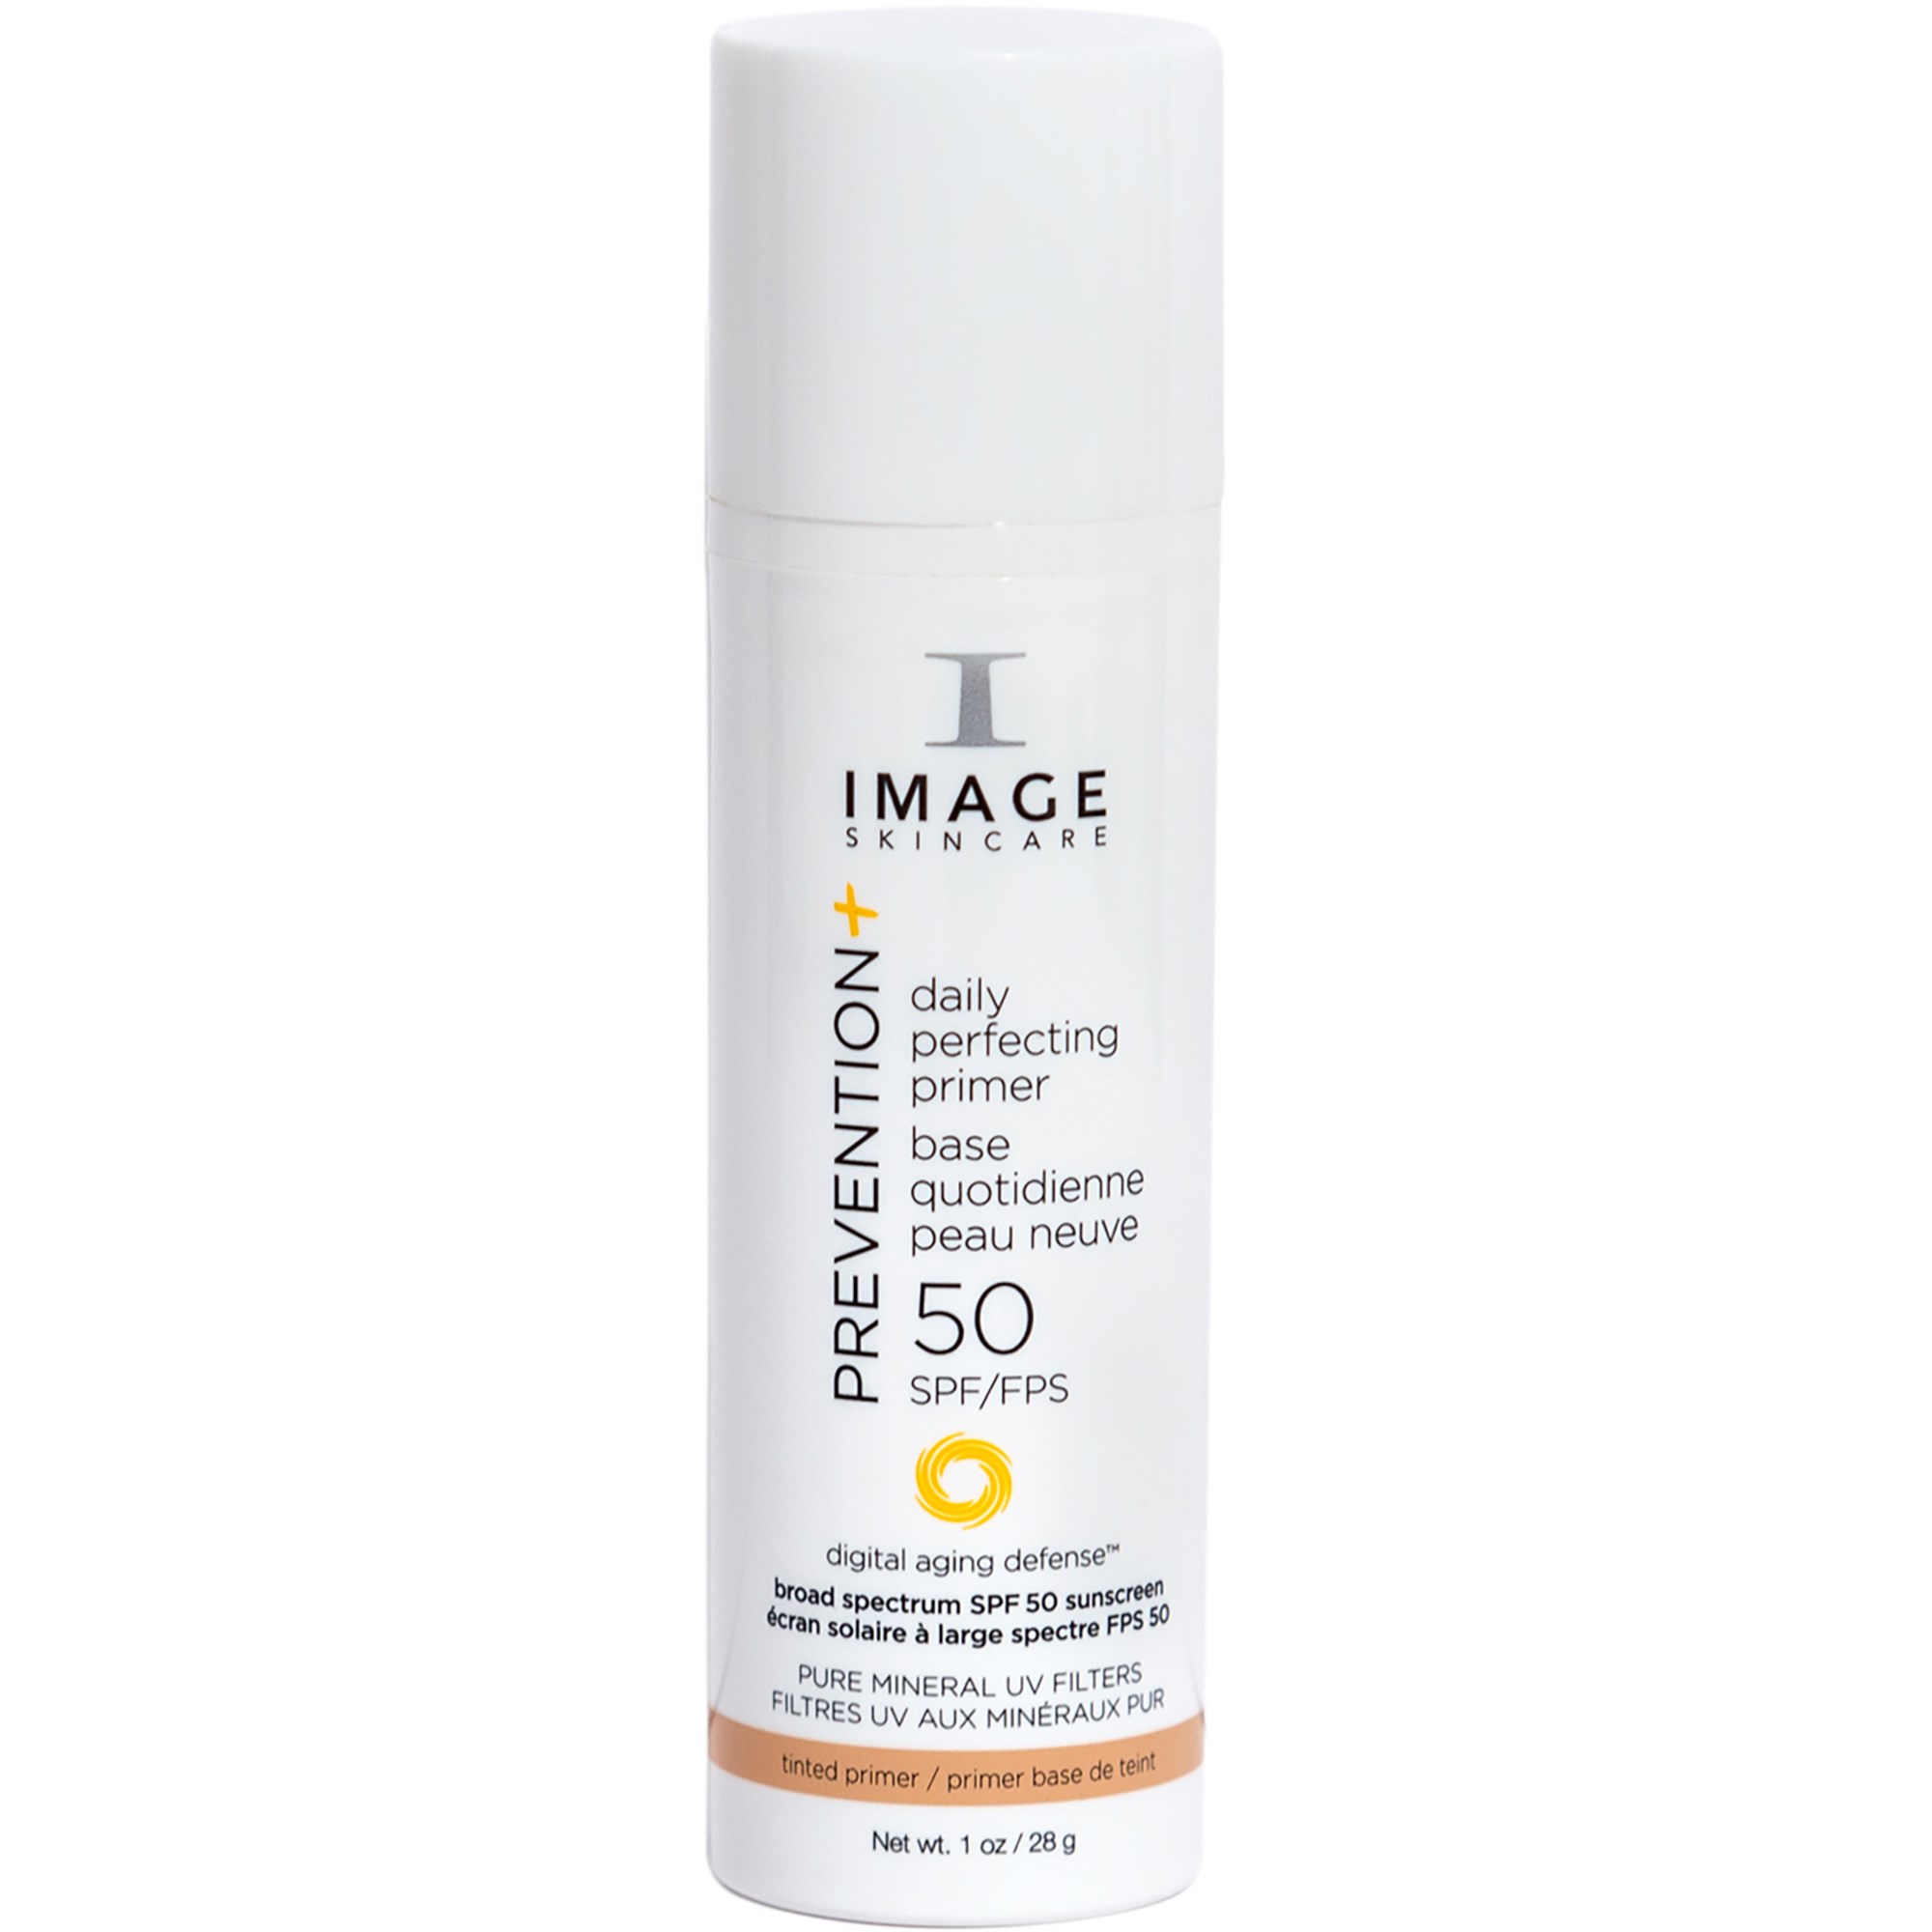 IMAGE Skincare Prevention+ Daily Perfecting Primer SPF 50 28 g